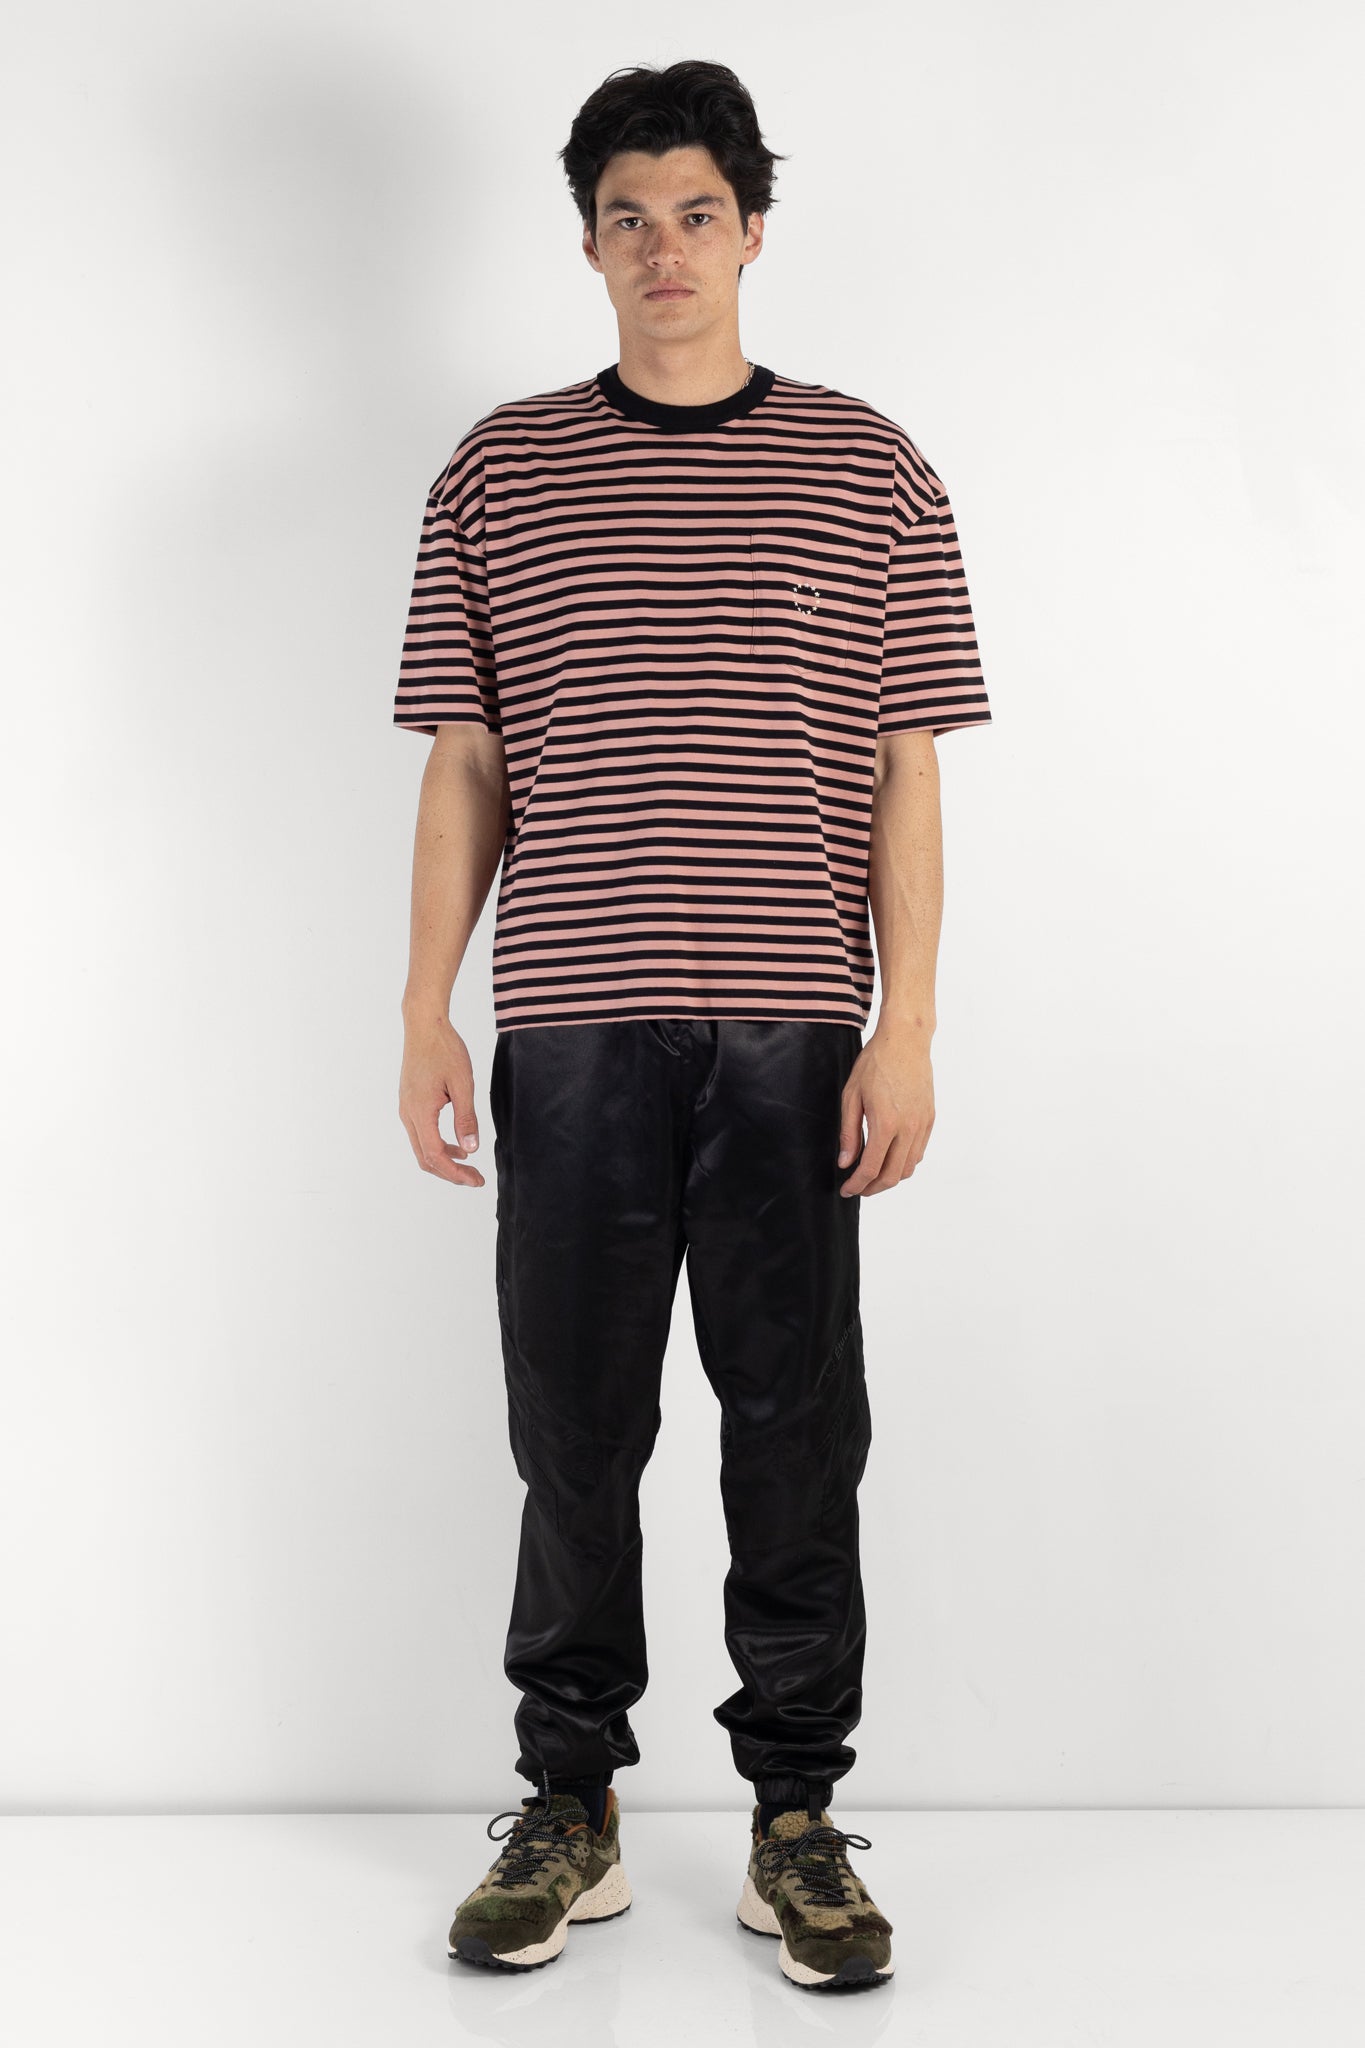 Etudes | New Arrivals | The Standard store – The Standard Store